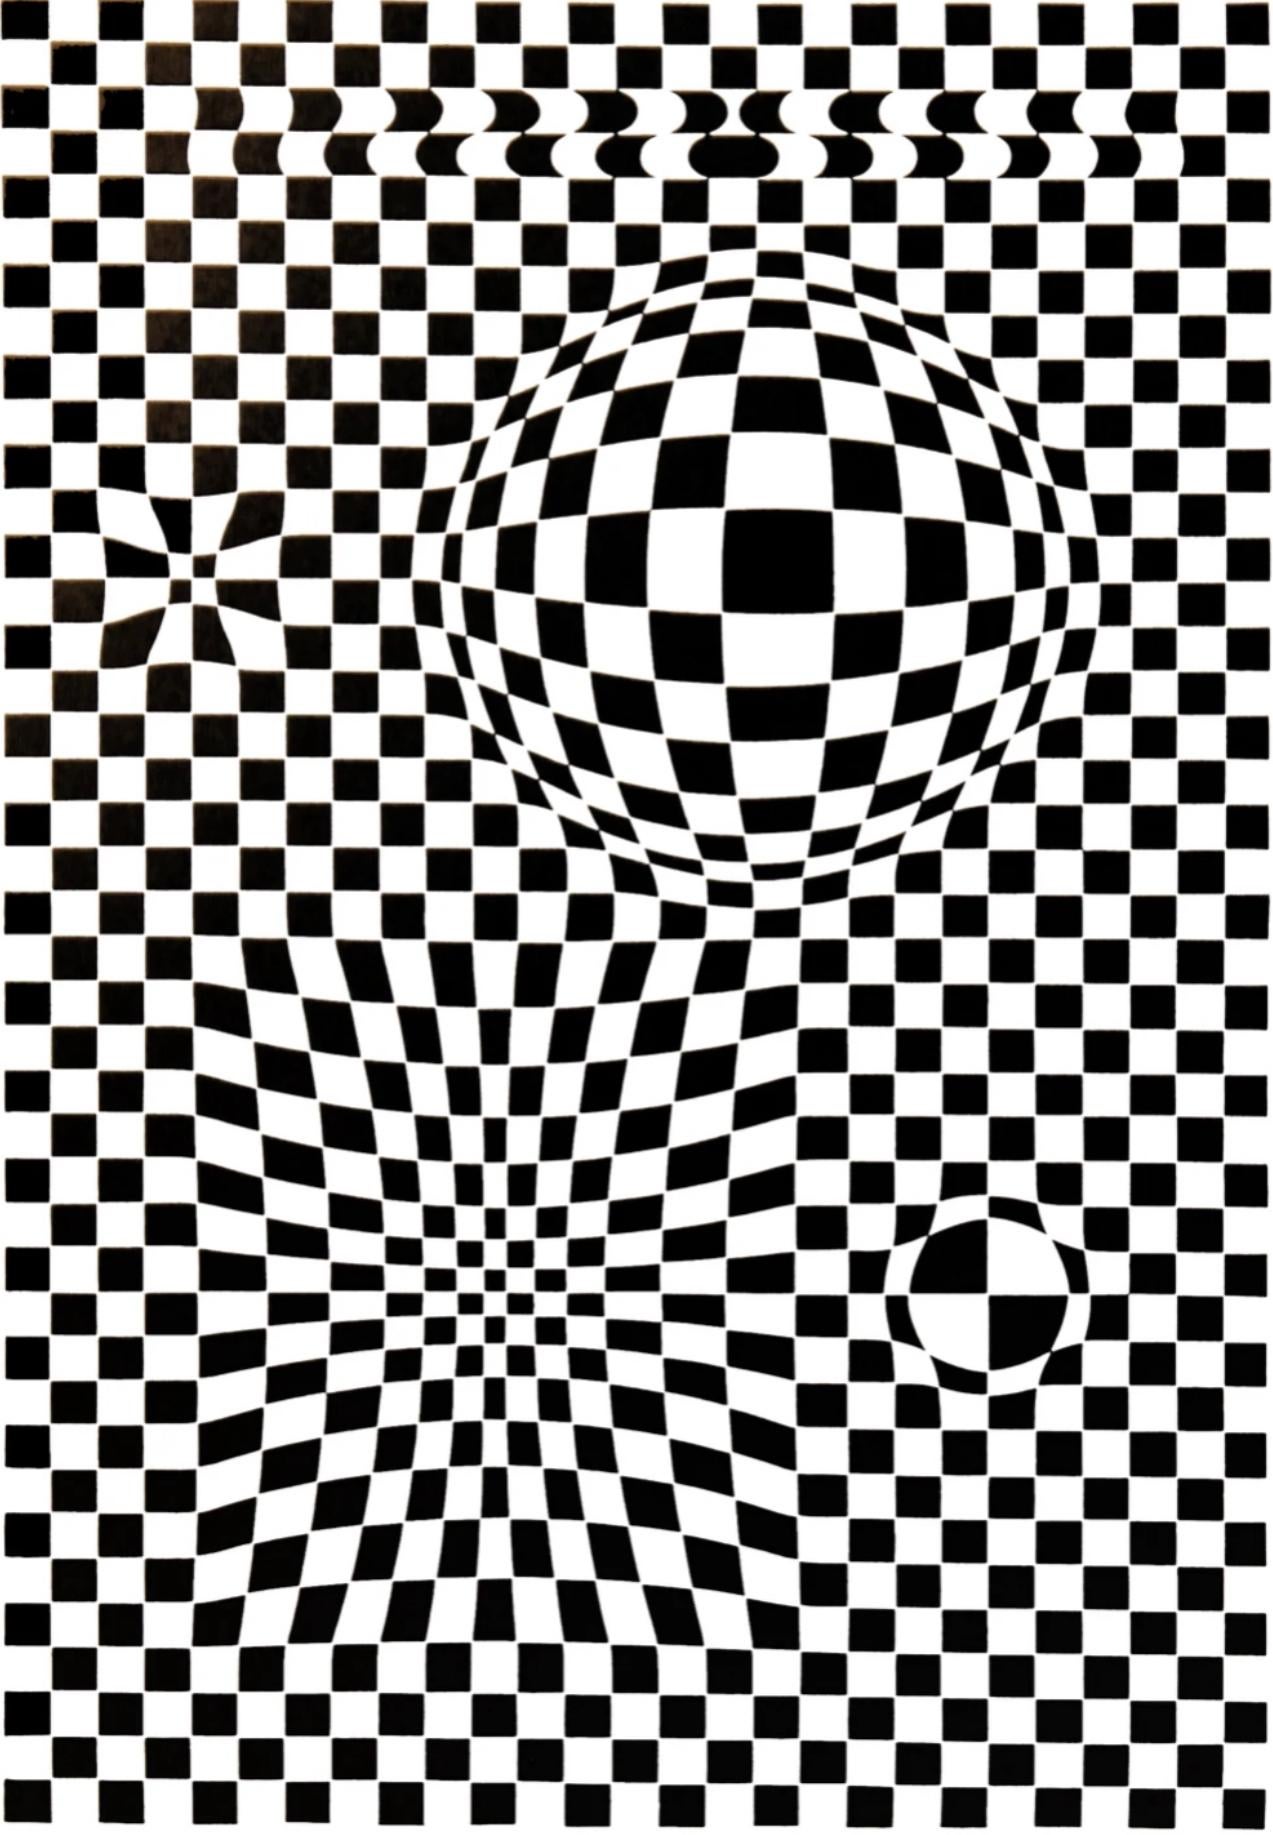 Victor Vasarely Abstract Print - Vasarely, Composition, Corpusculaires (after)